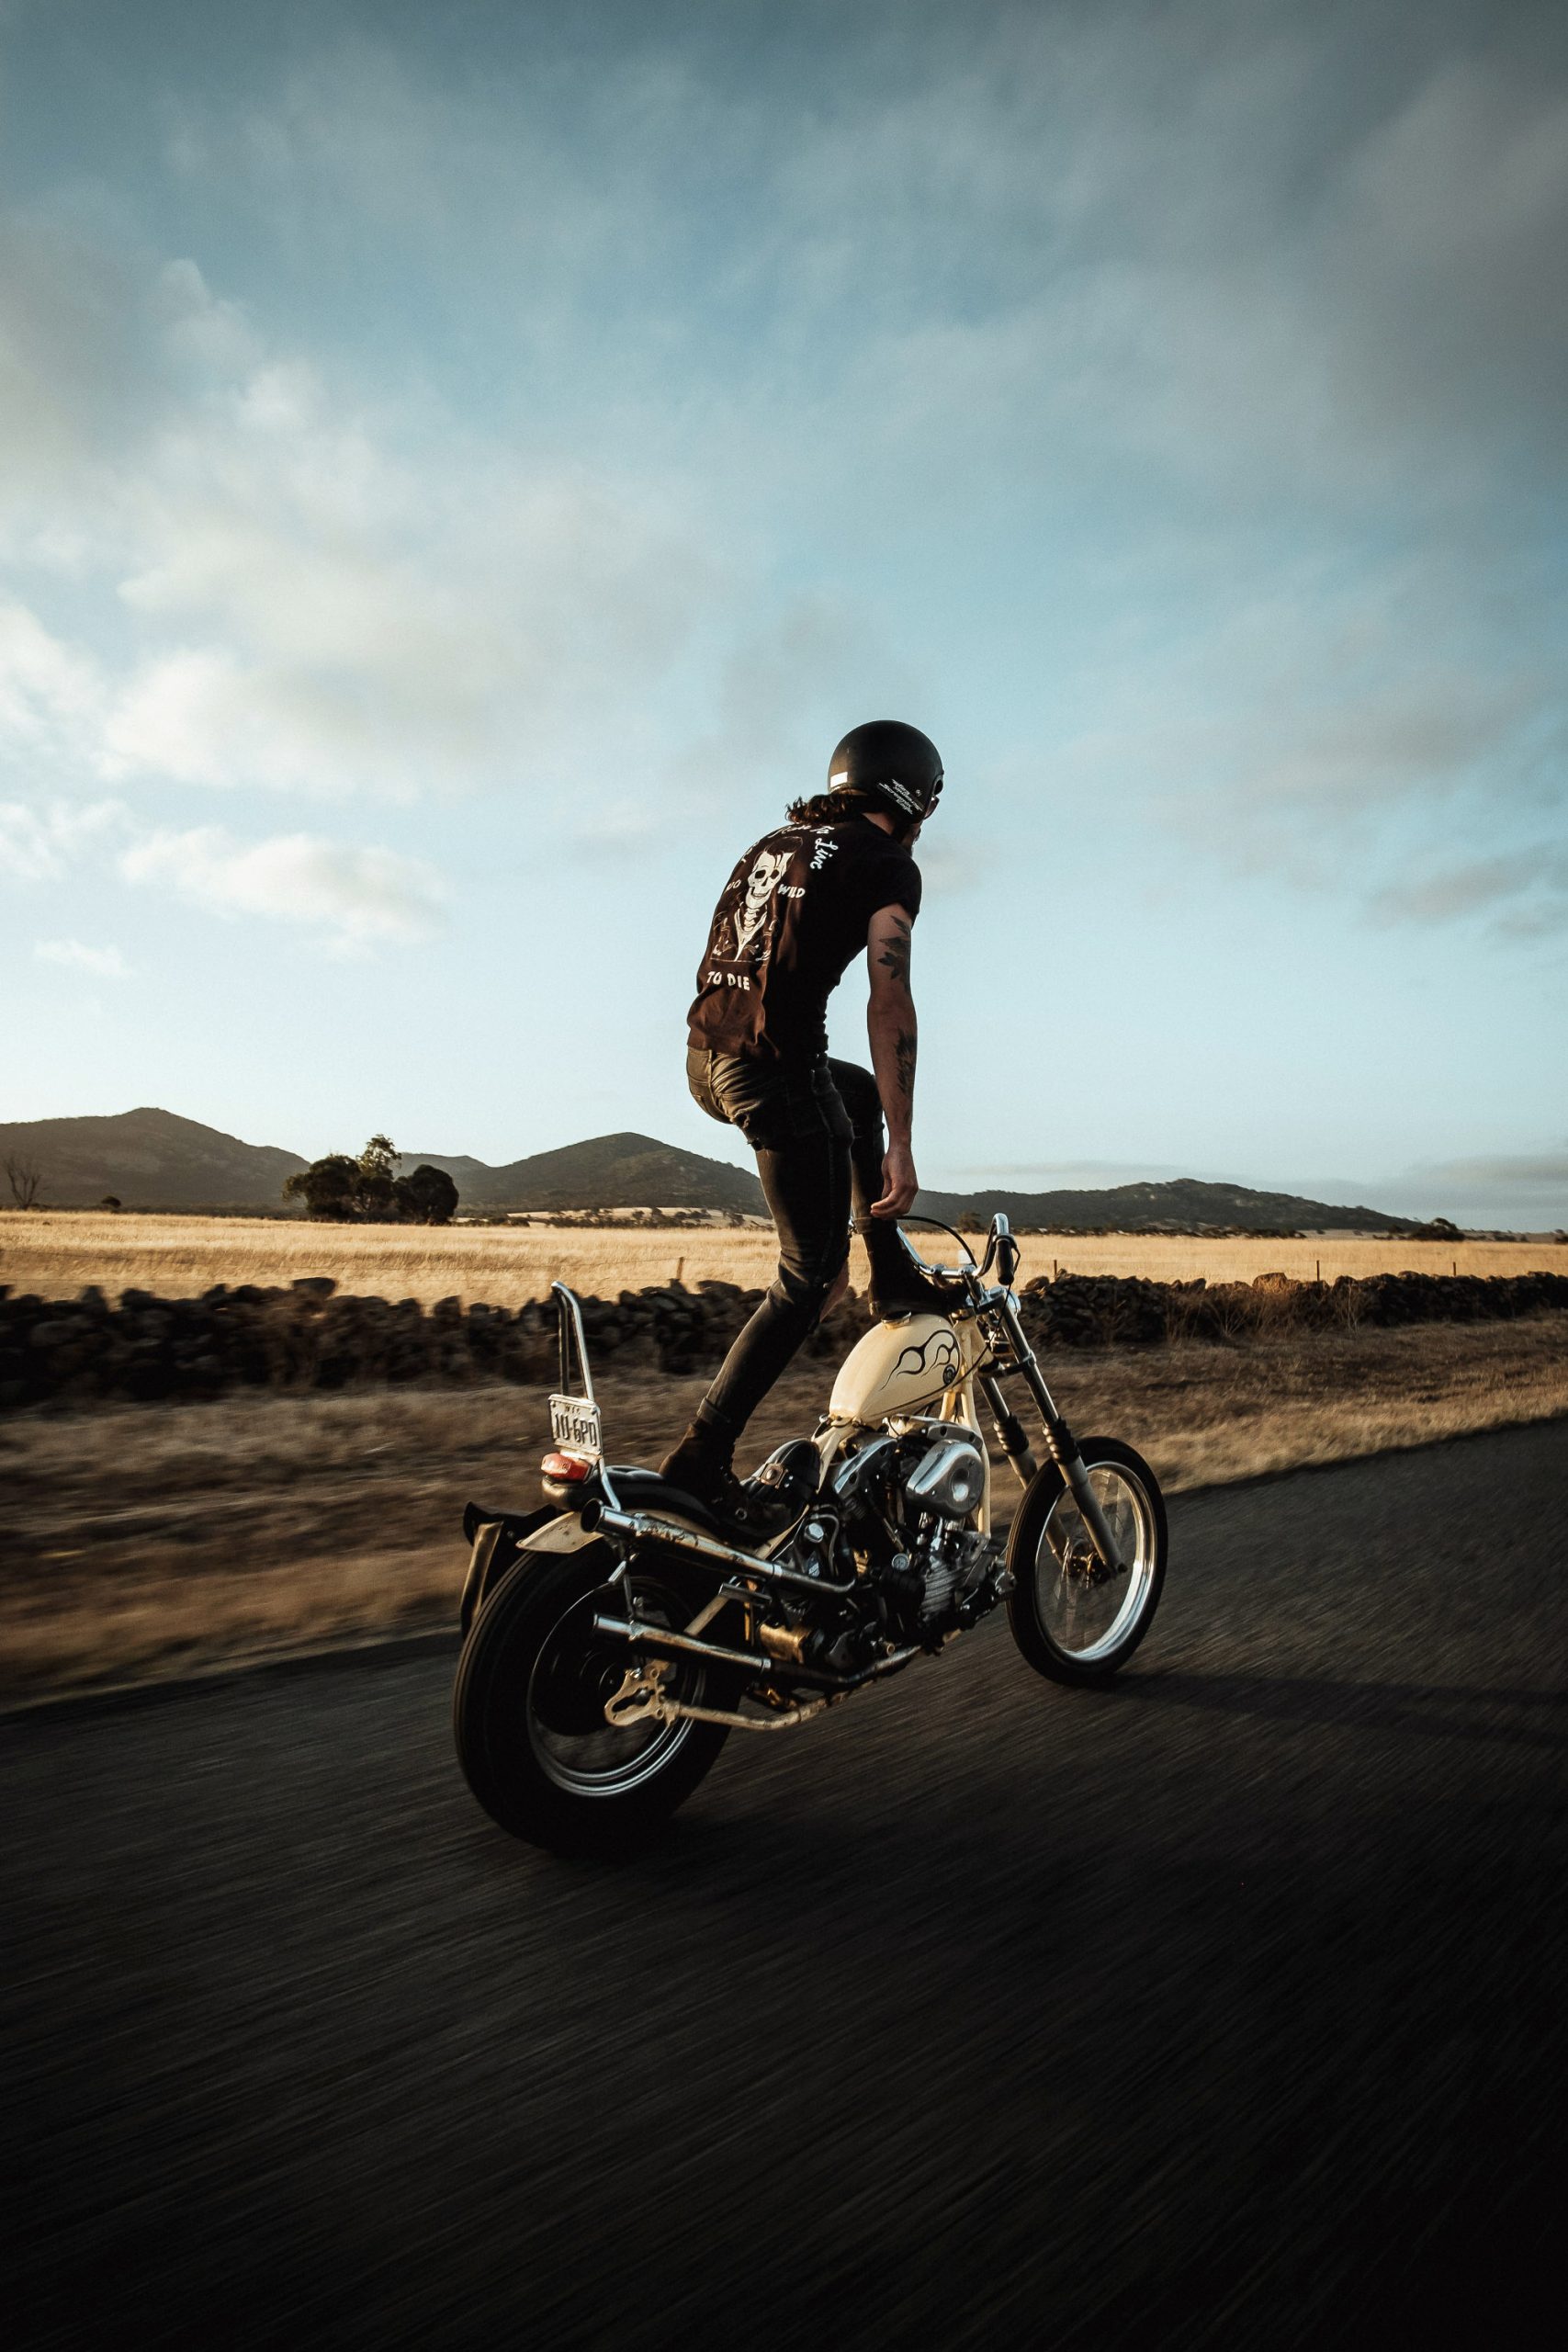 A Harley chopper rider in rural Australia stands upright on his bike as it travels down the road